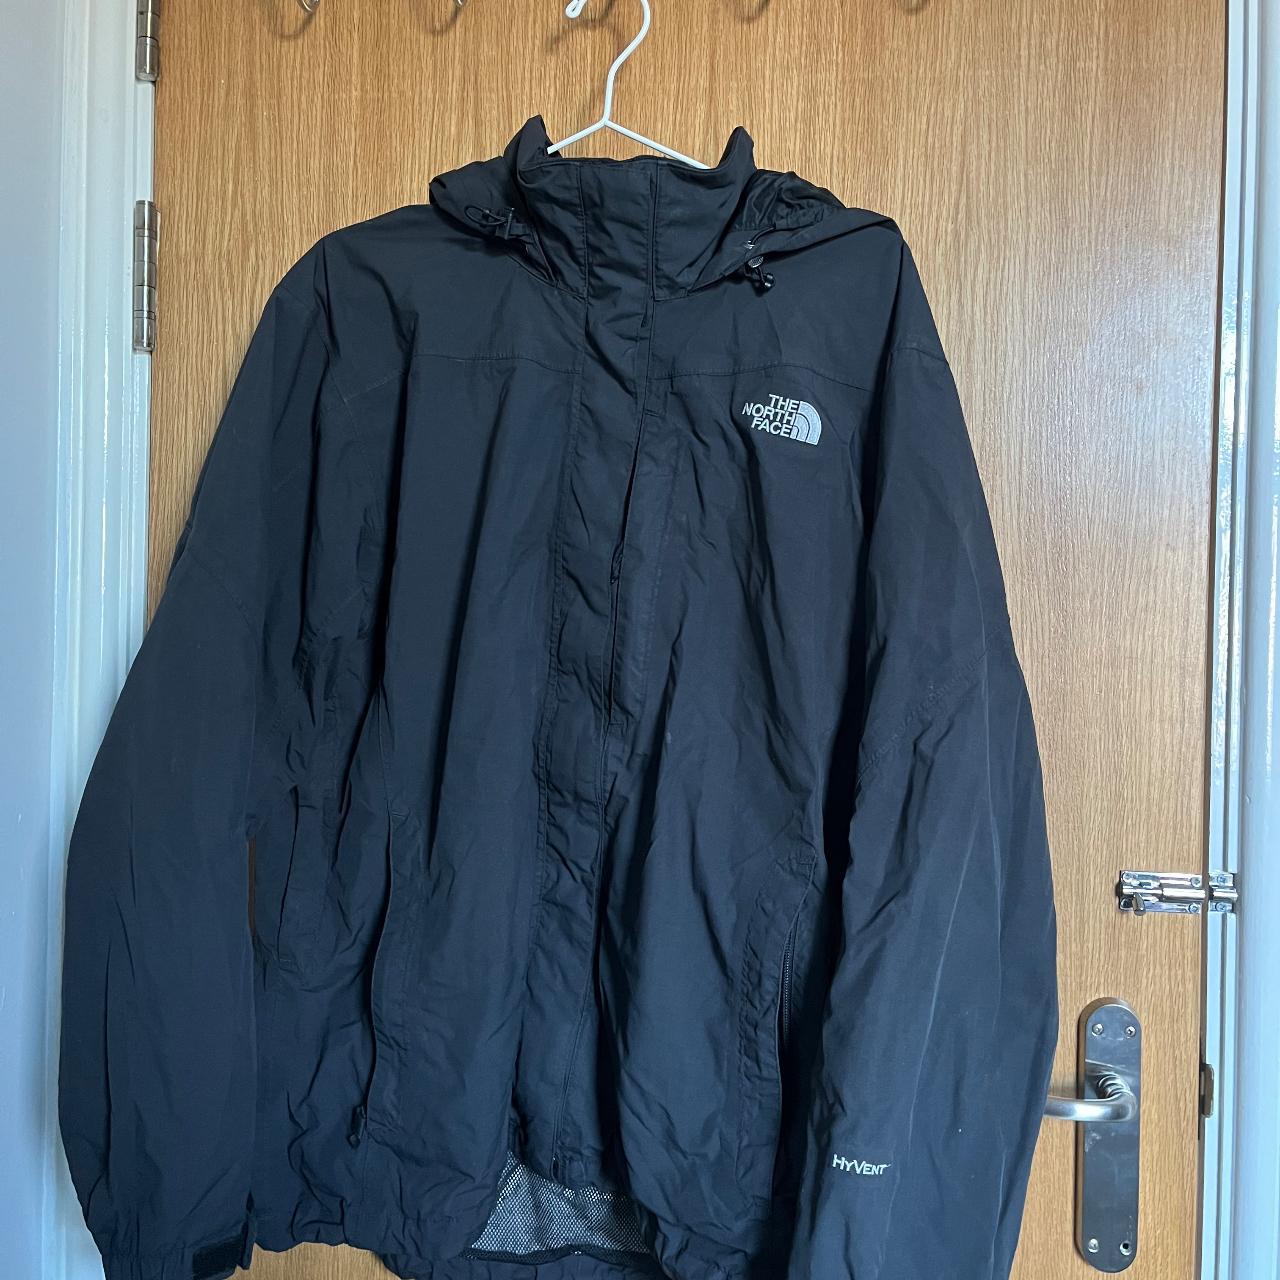 Black The north face Coat. Size XL Ladies and fits a... - Depop